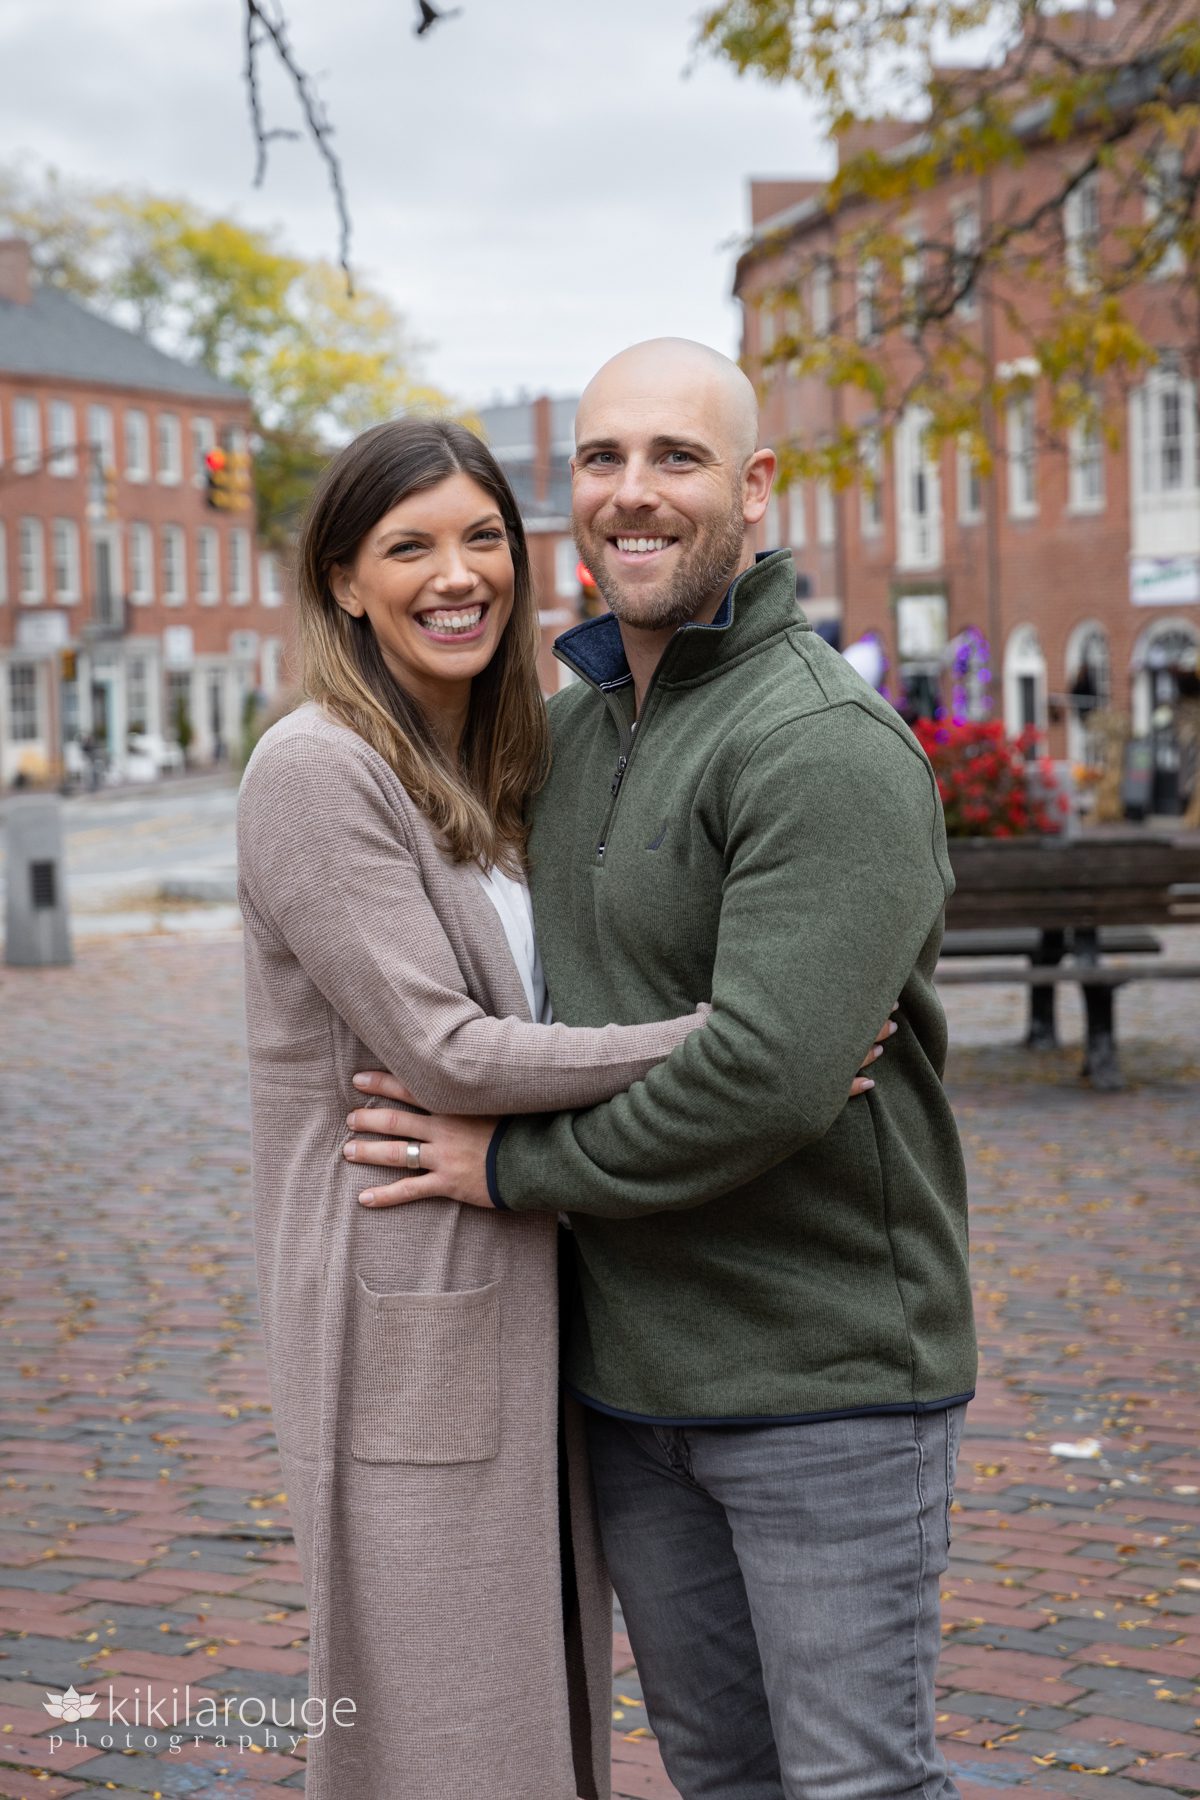 Cute 30 something couple in Newburyport square surround by brick backdrops